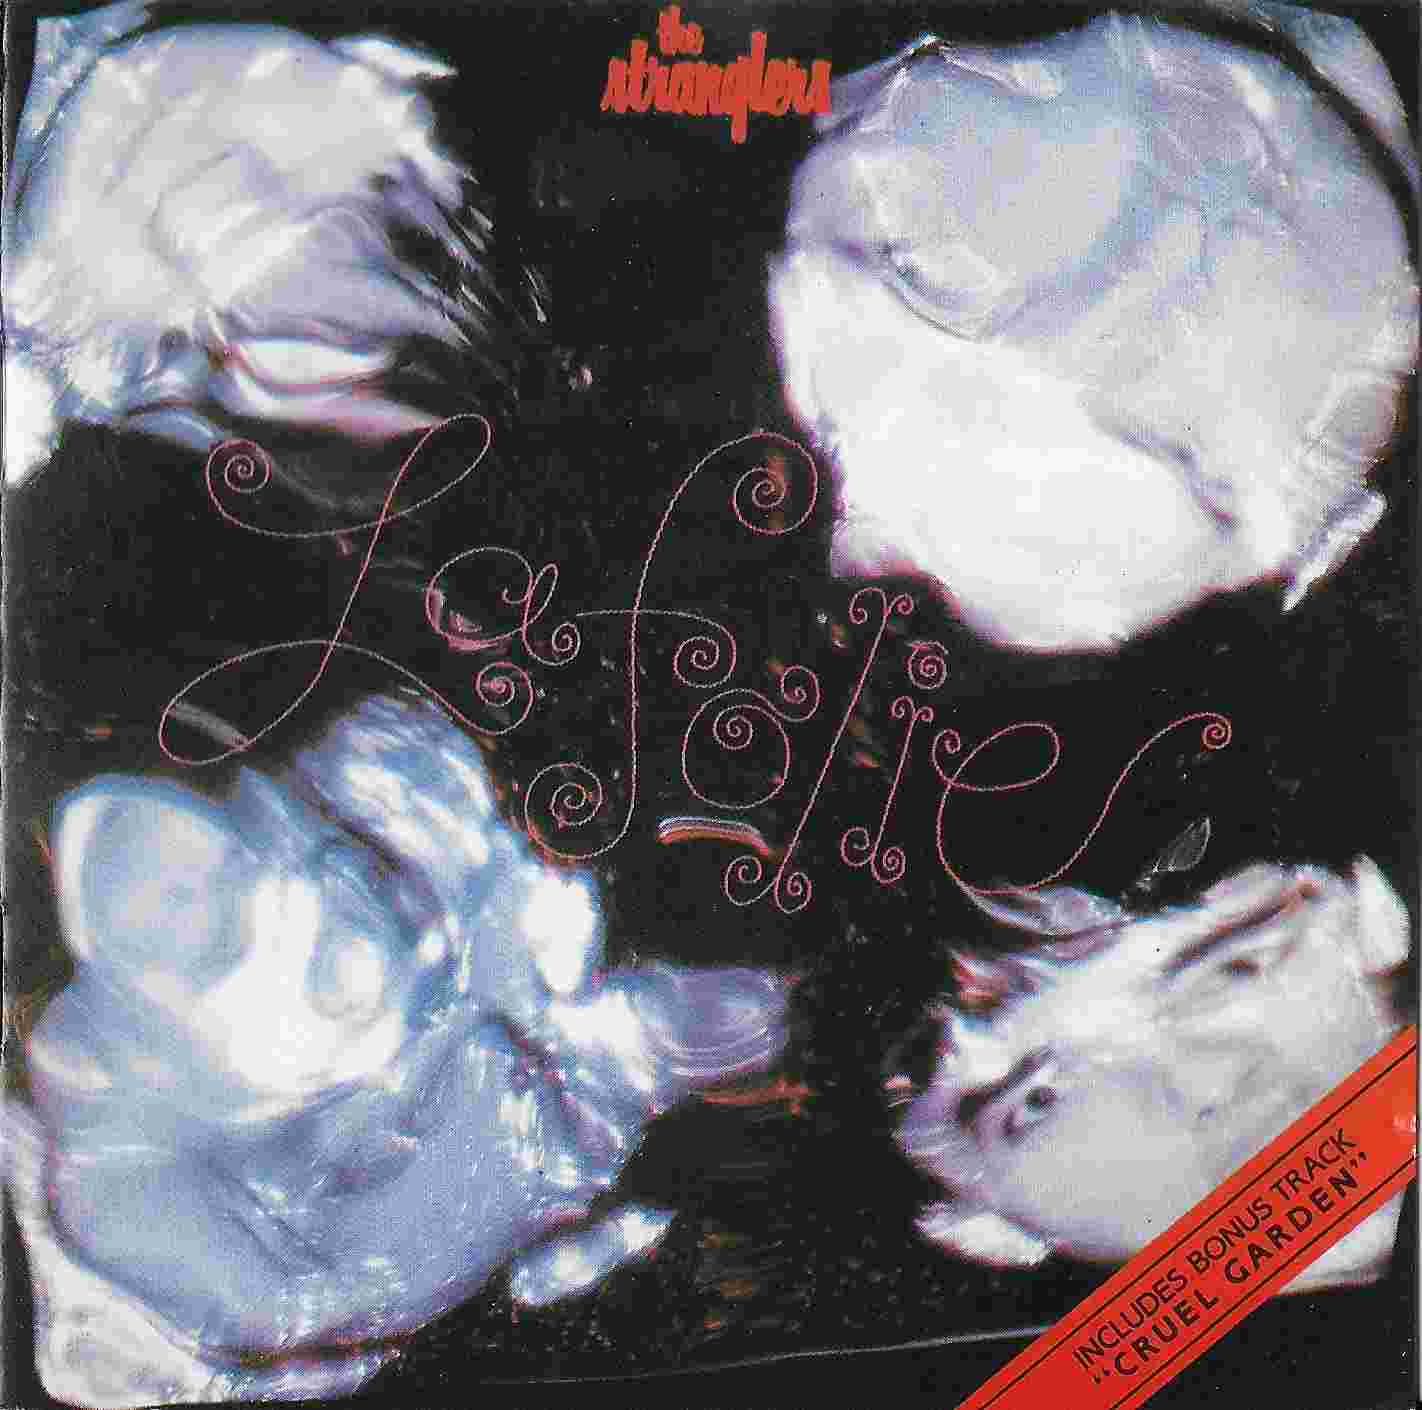 Picture of CDP 746614-2 La folie by artist The Stranglers